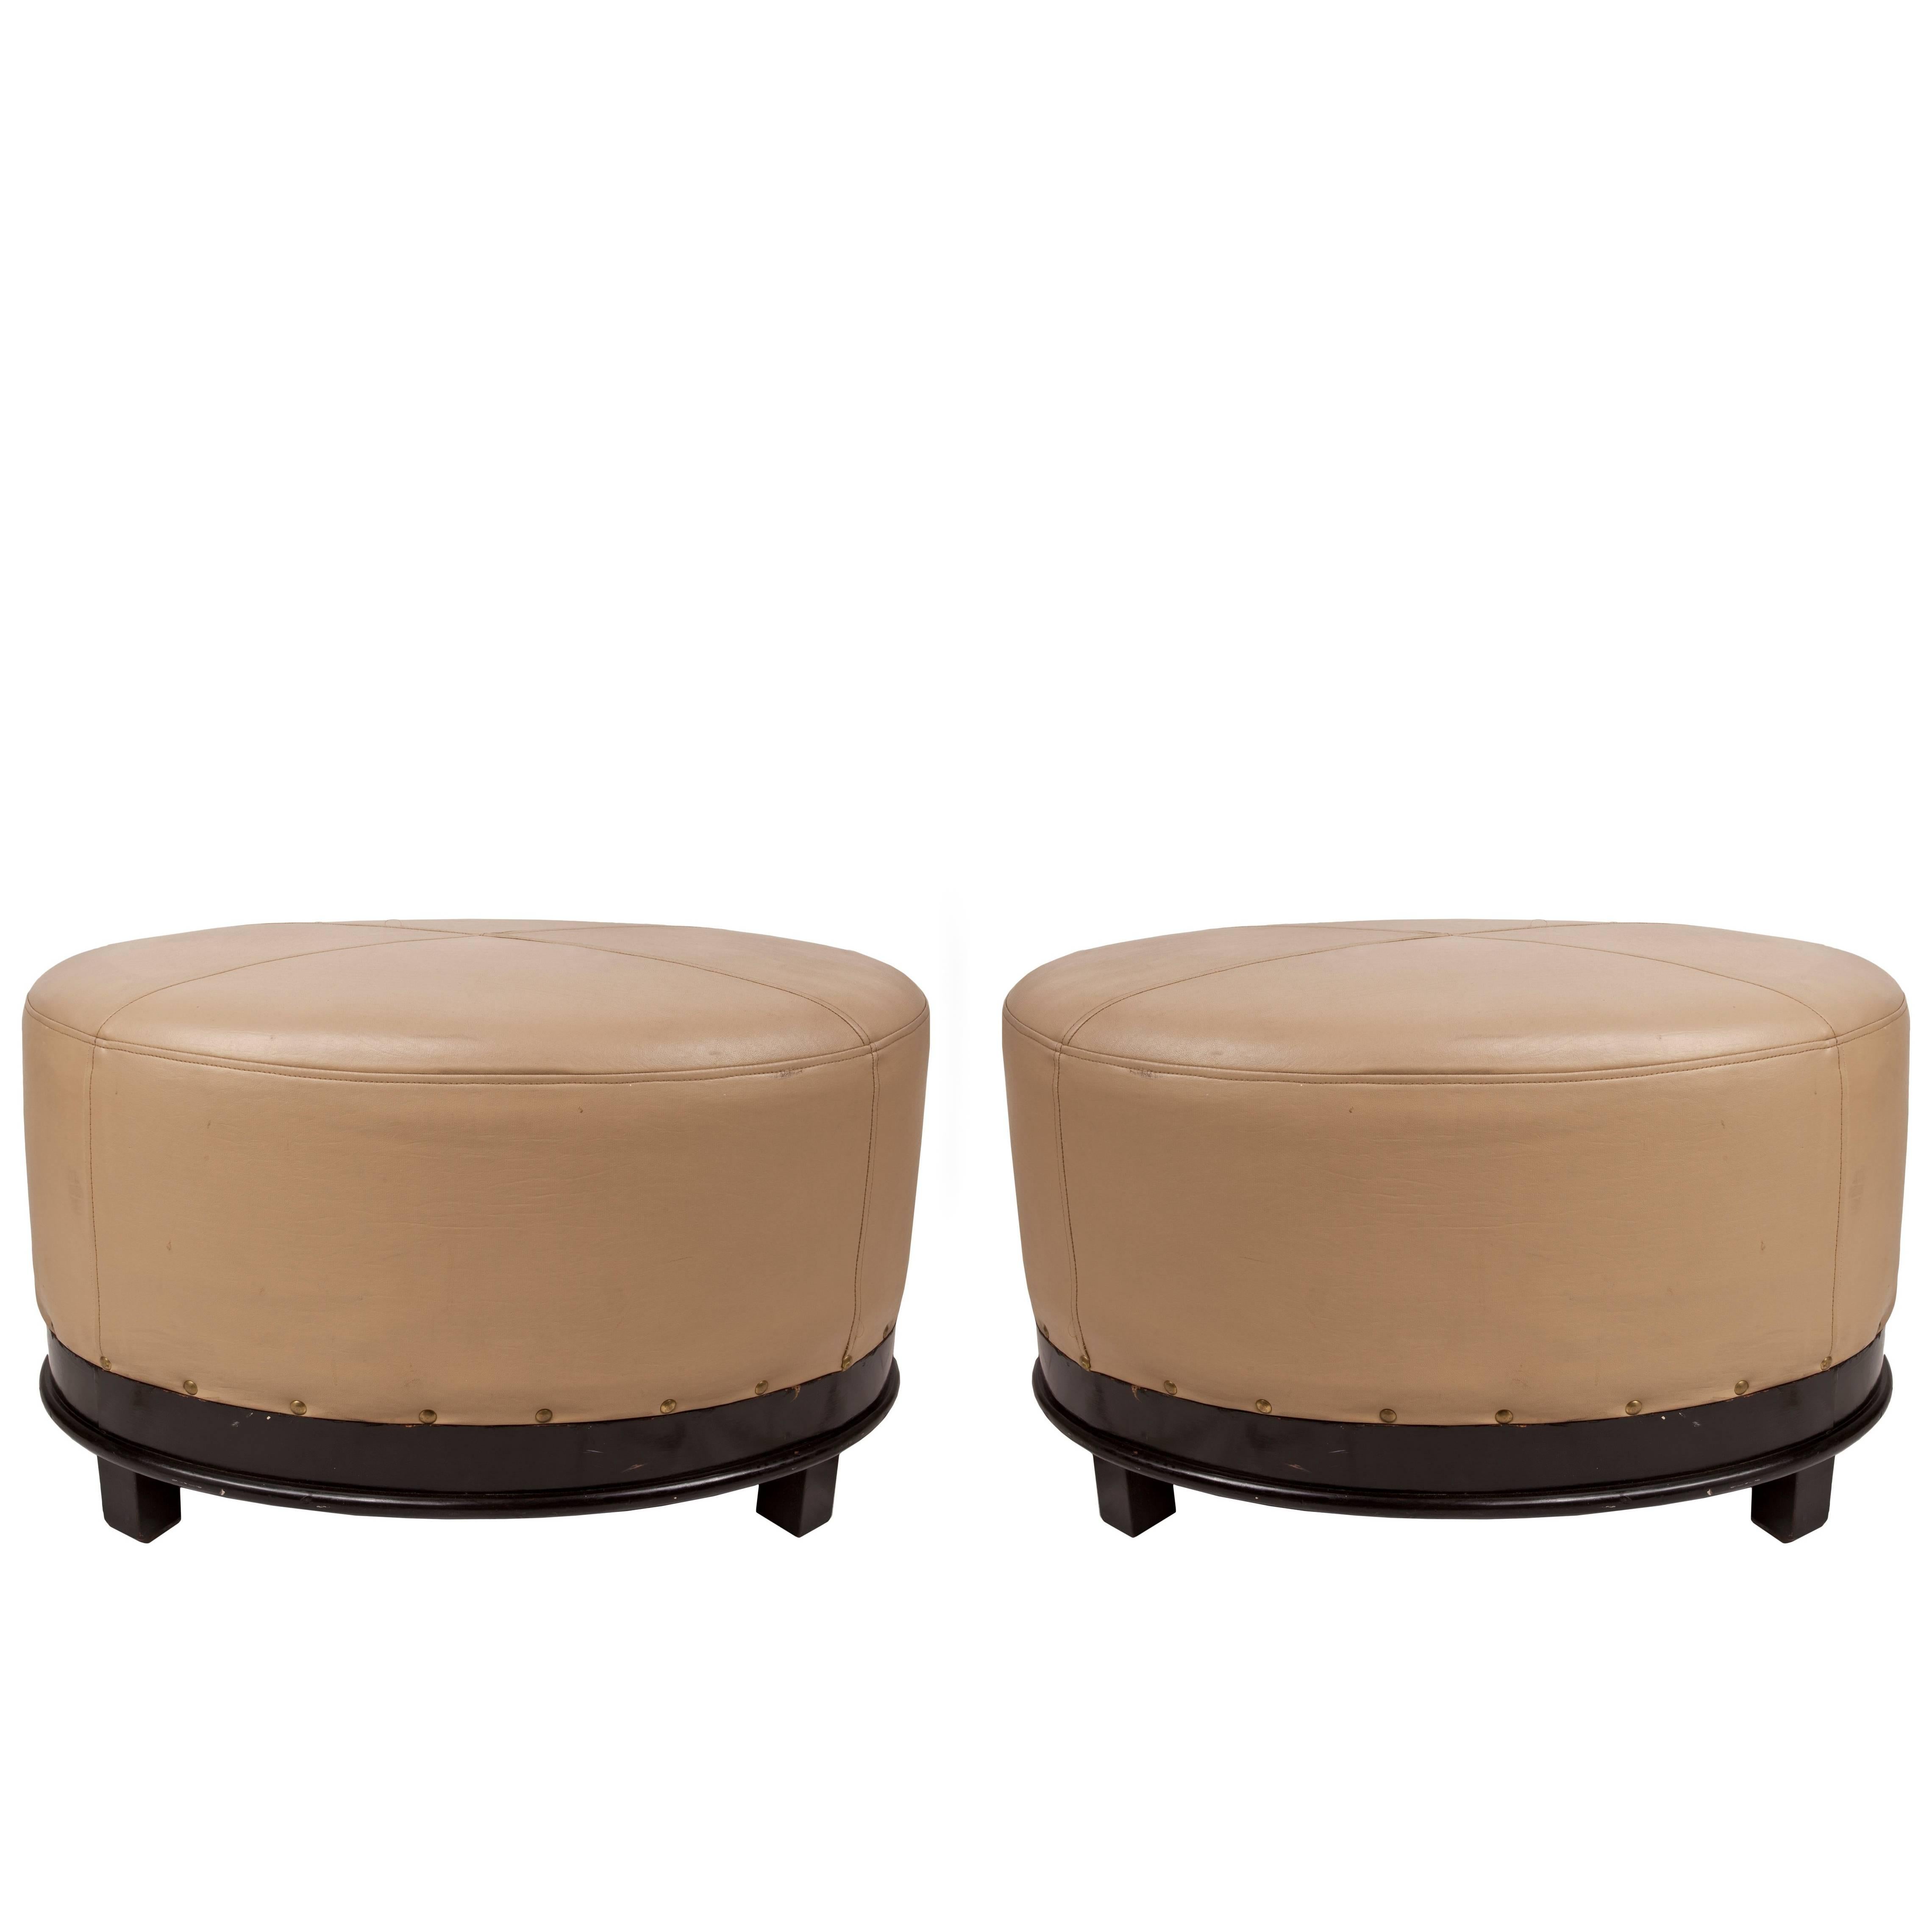 Pair of Mid-Century Modern Tan Leather and Mahogany Ottomans